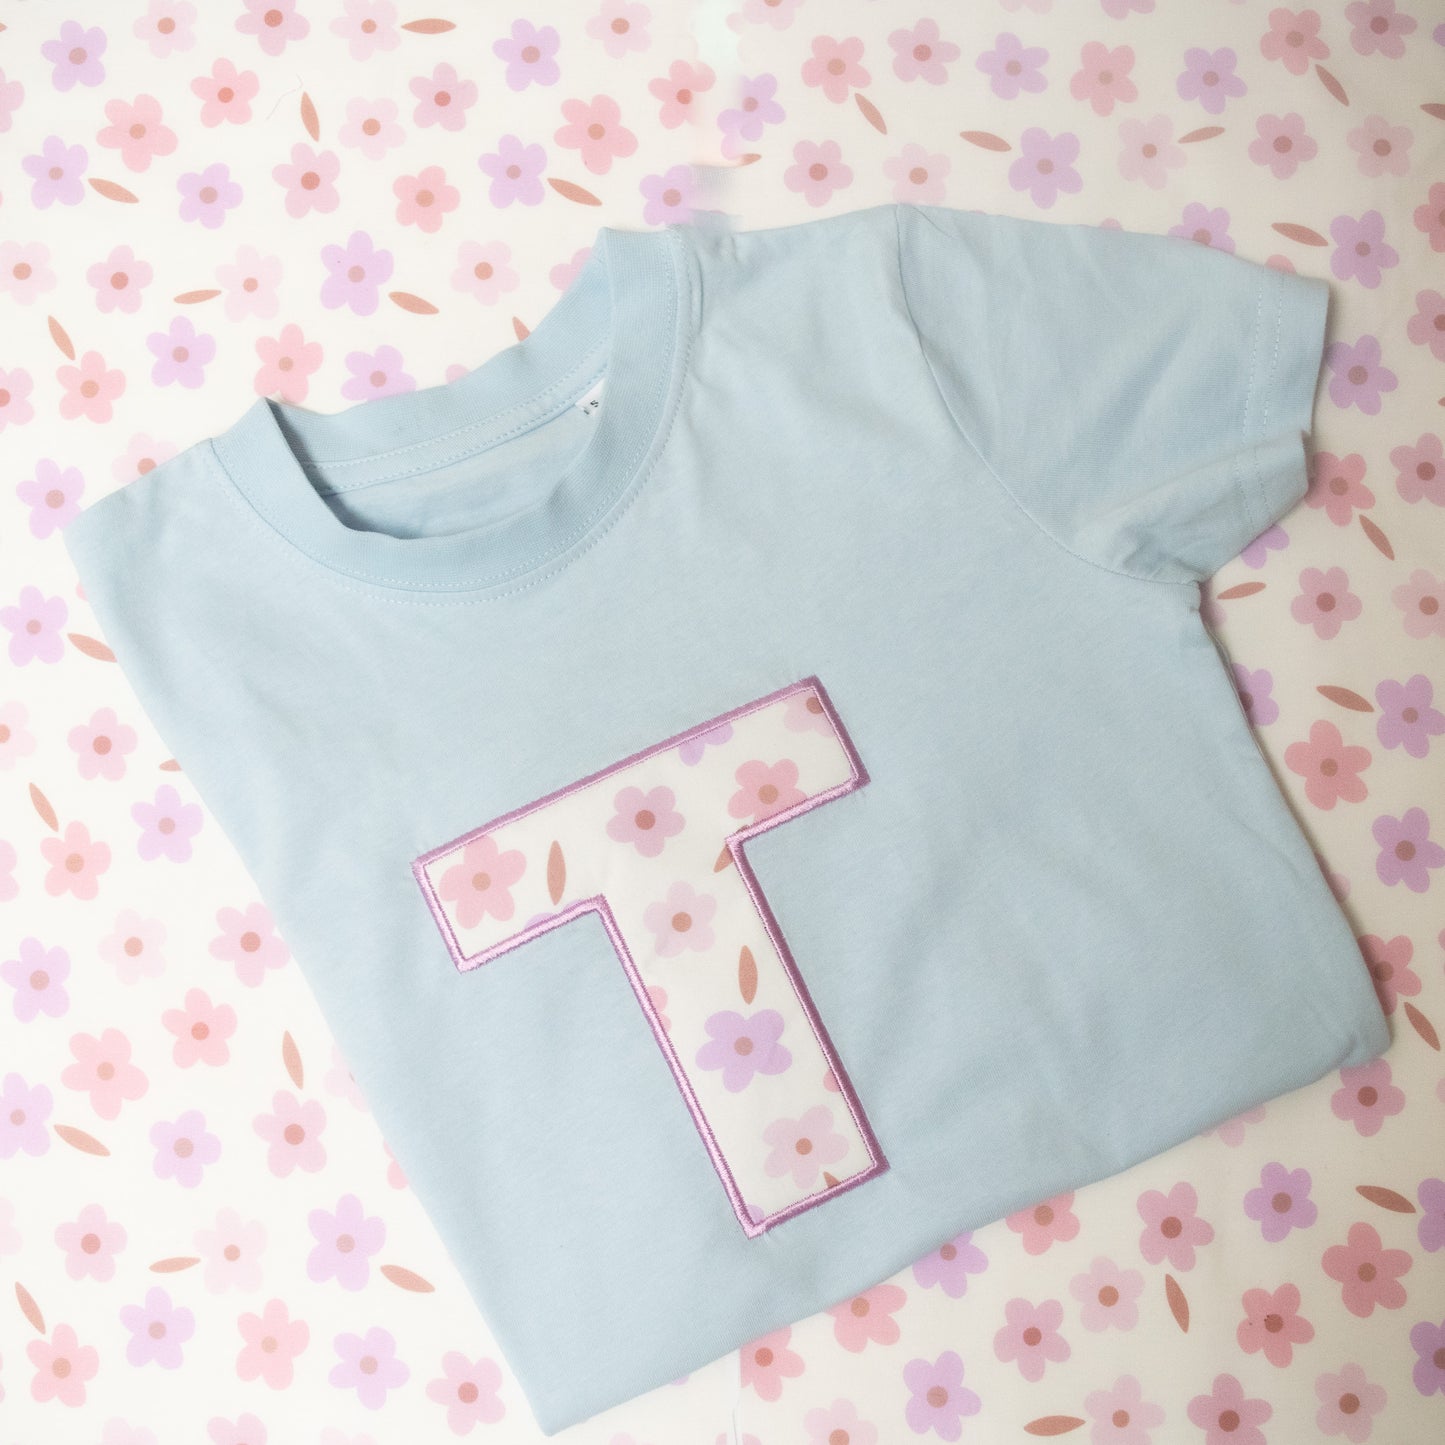 Personalised initial or age tshirt - little flower